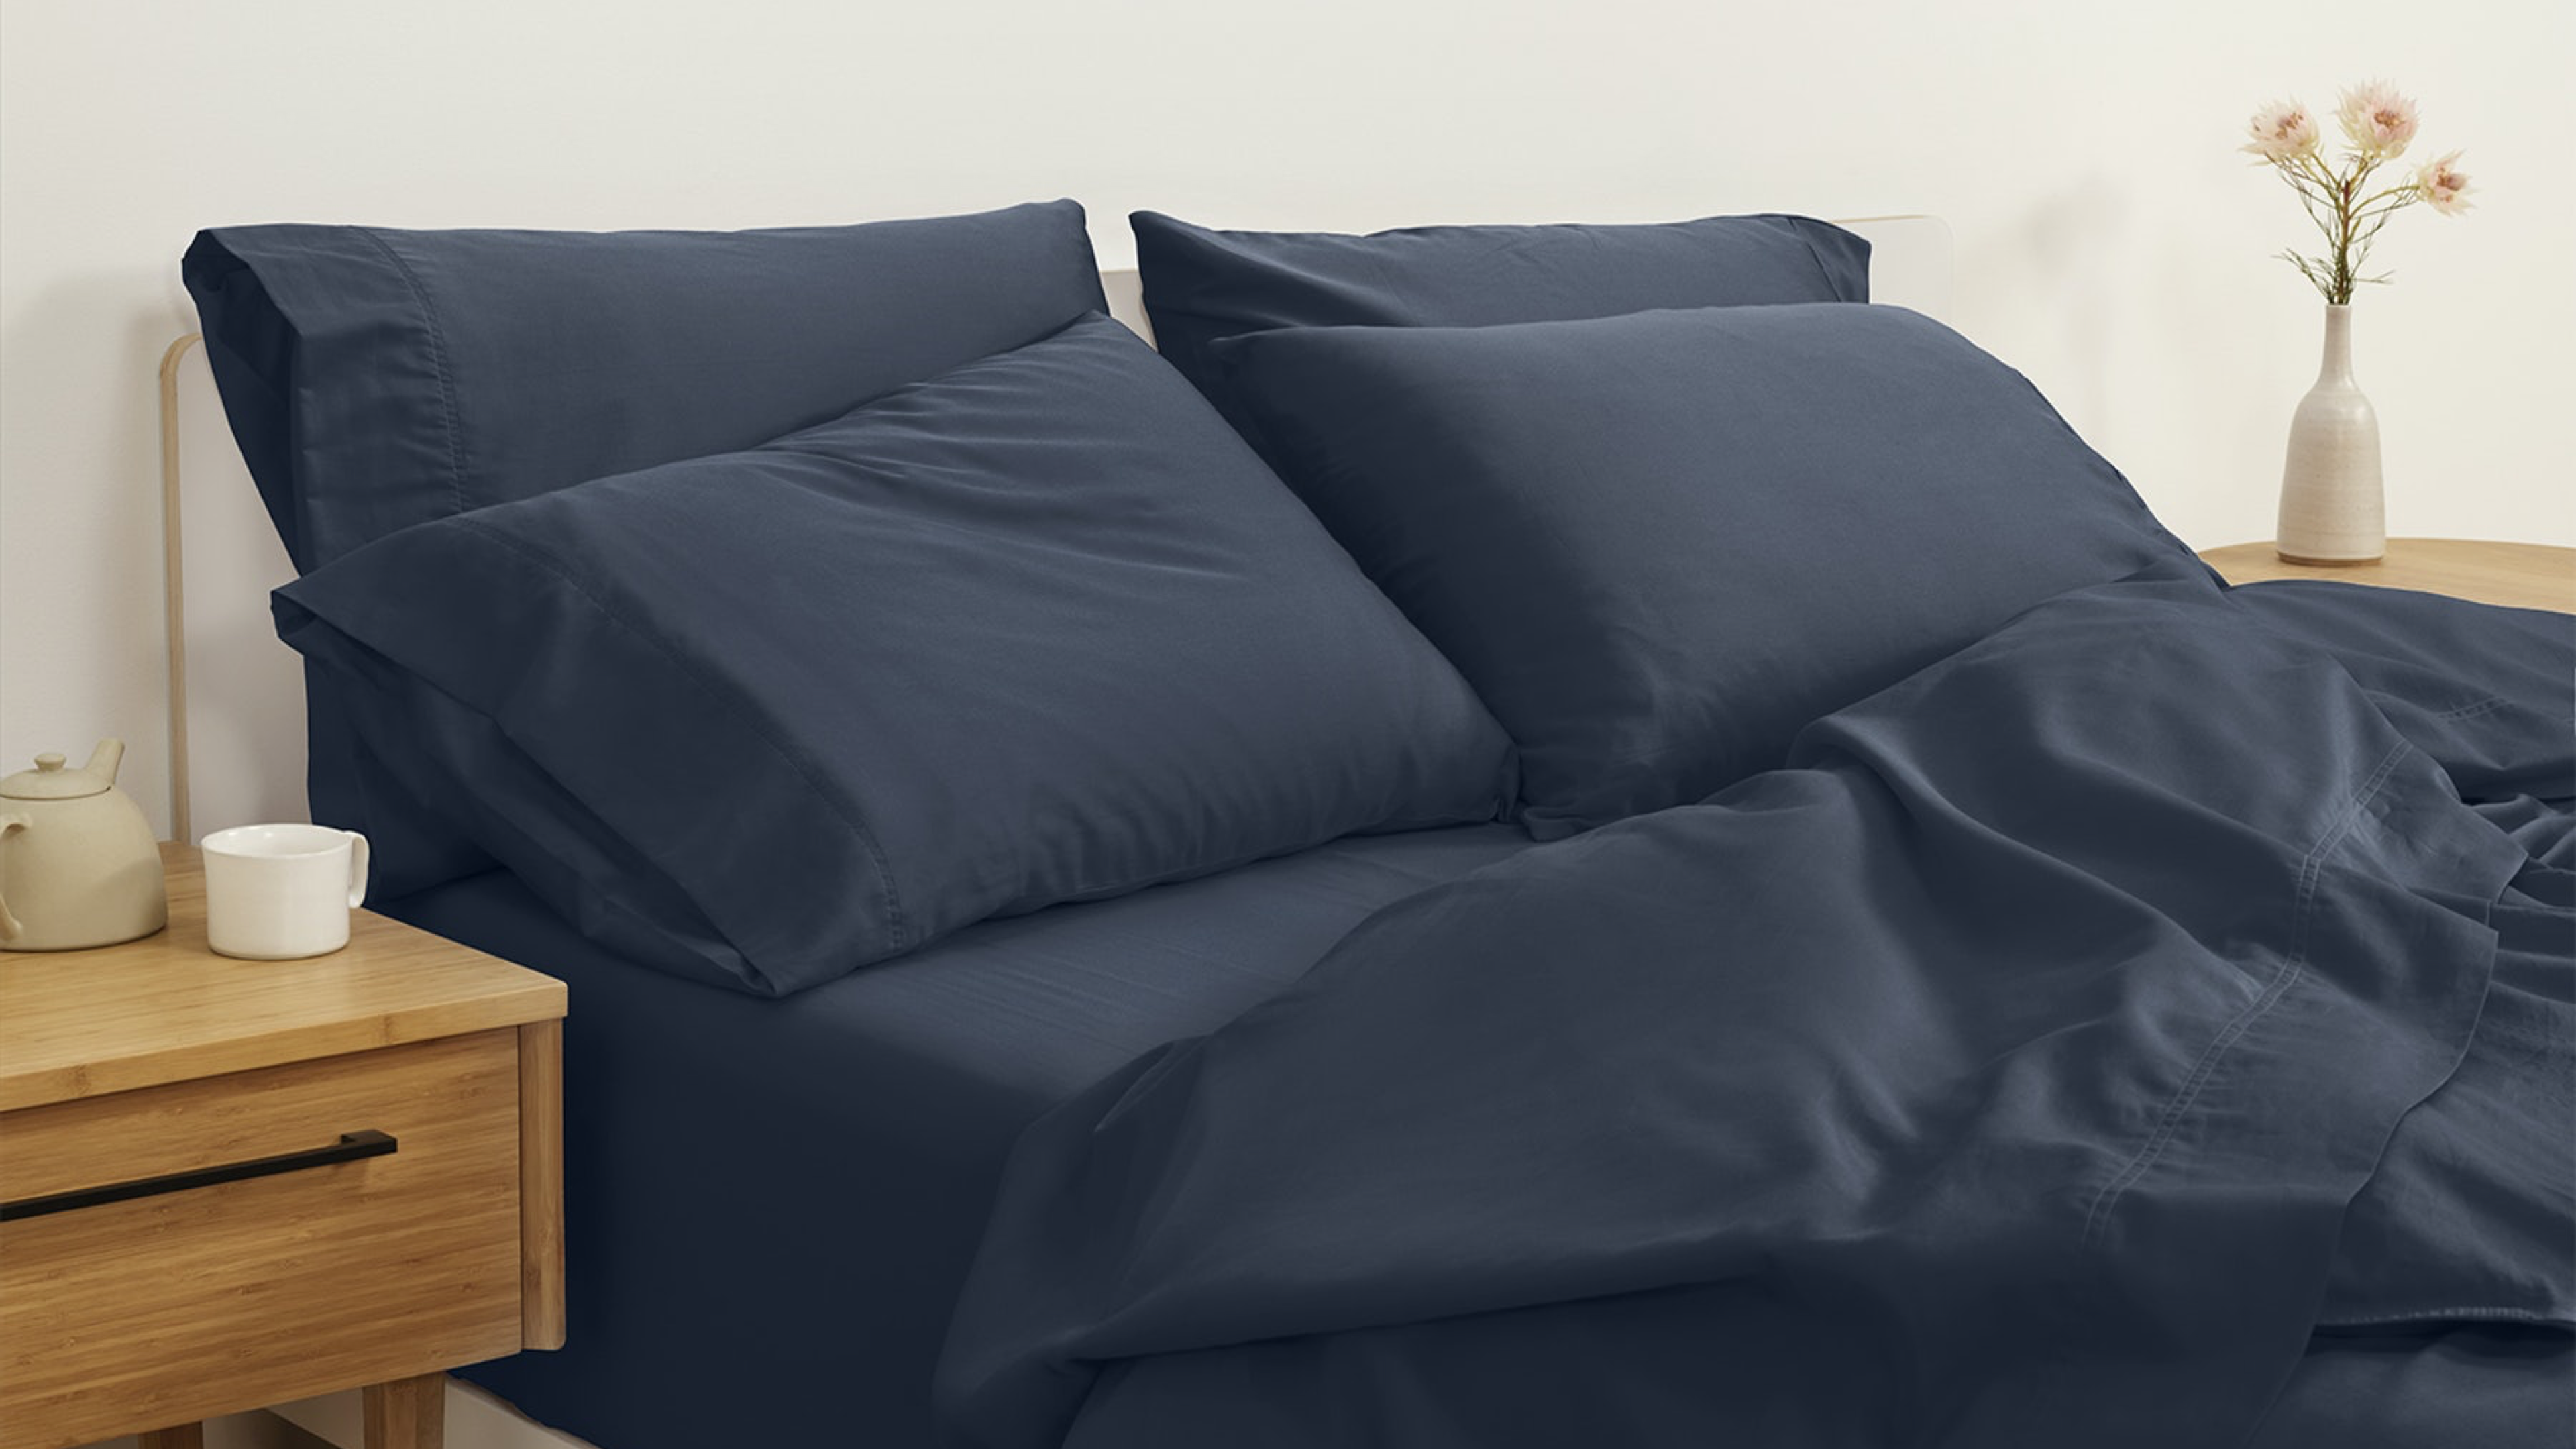 percale weave organic cotton sheet set comes with a fitted sheet, top sheet, and pillowcases